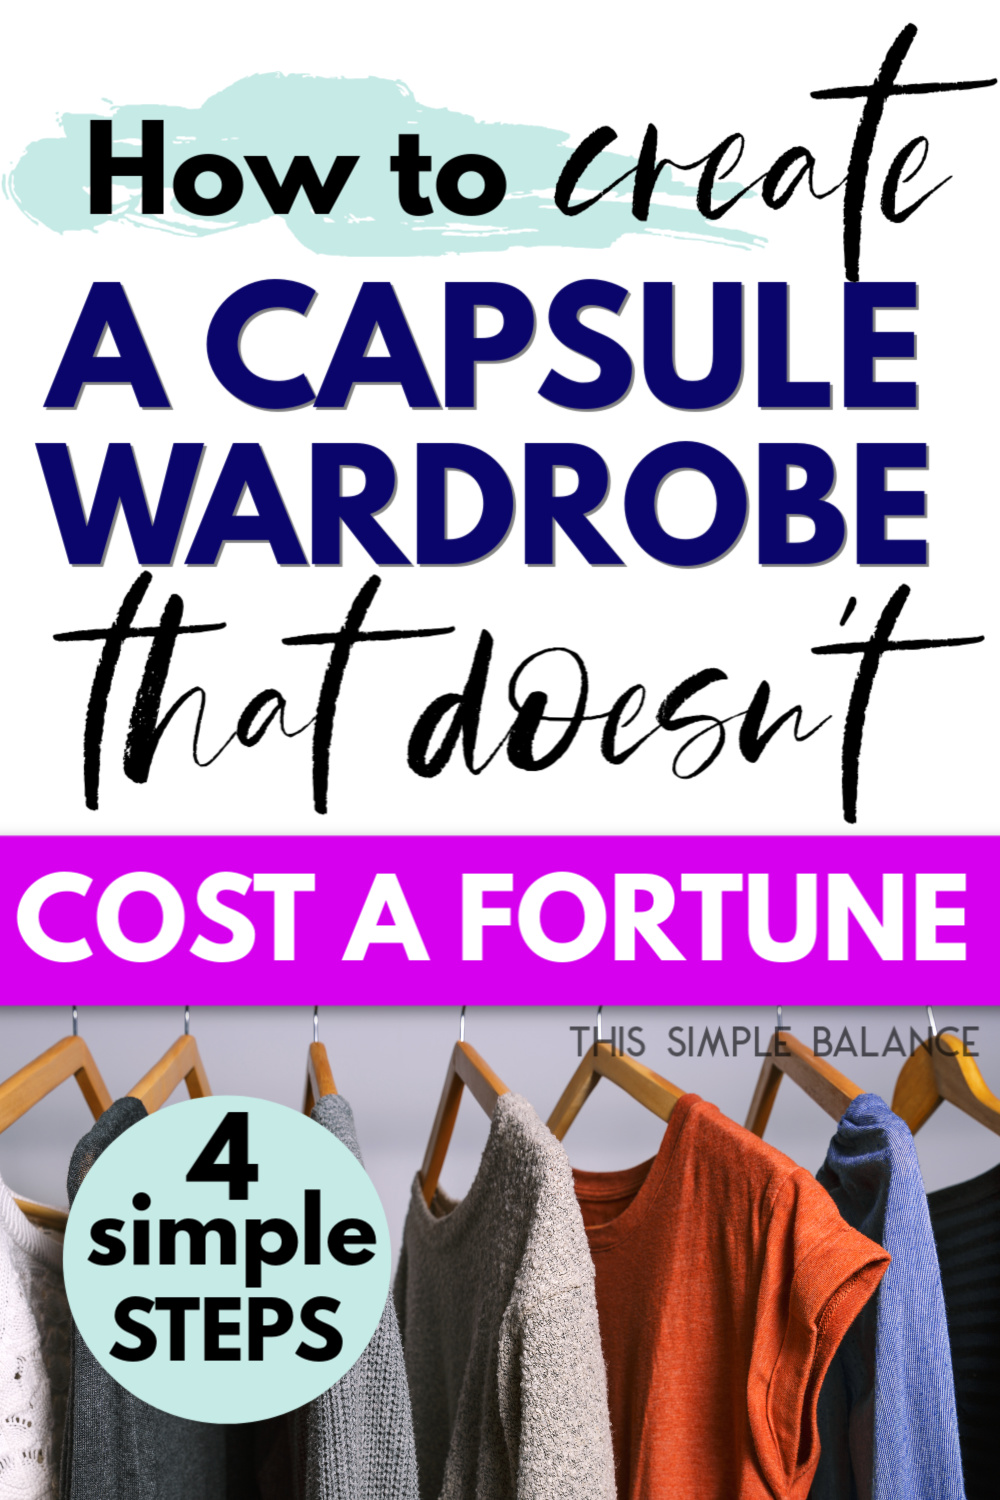 close up of shorts on matching wooden hangers, with text overlay "how to create a capsule wardrobe that doesn't cost a fortune - 4 simple steps"